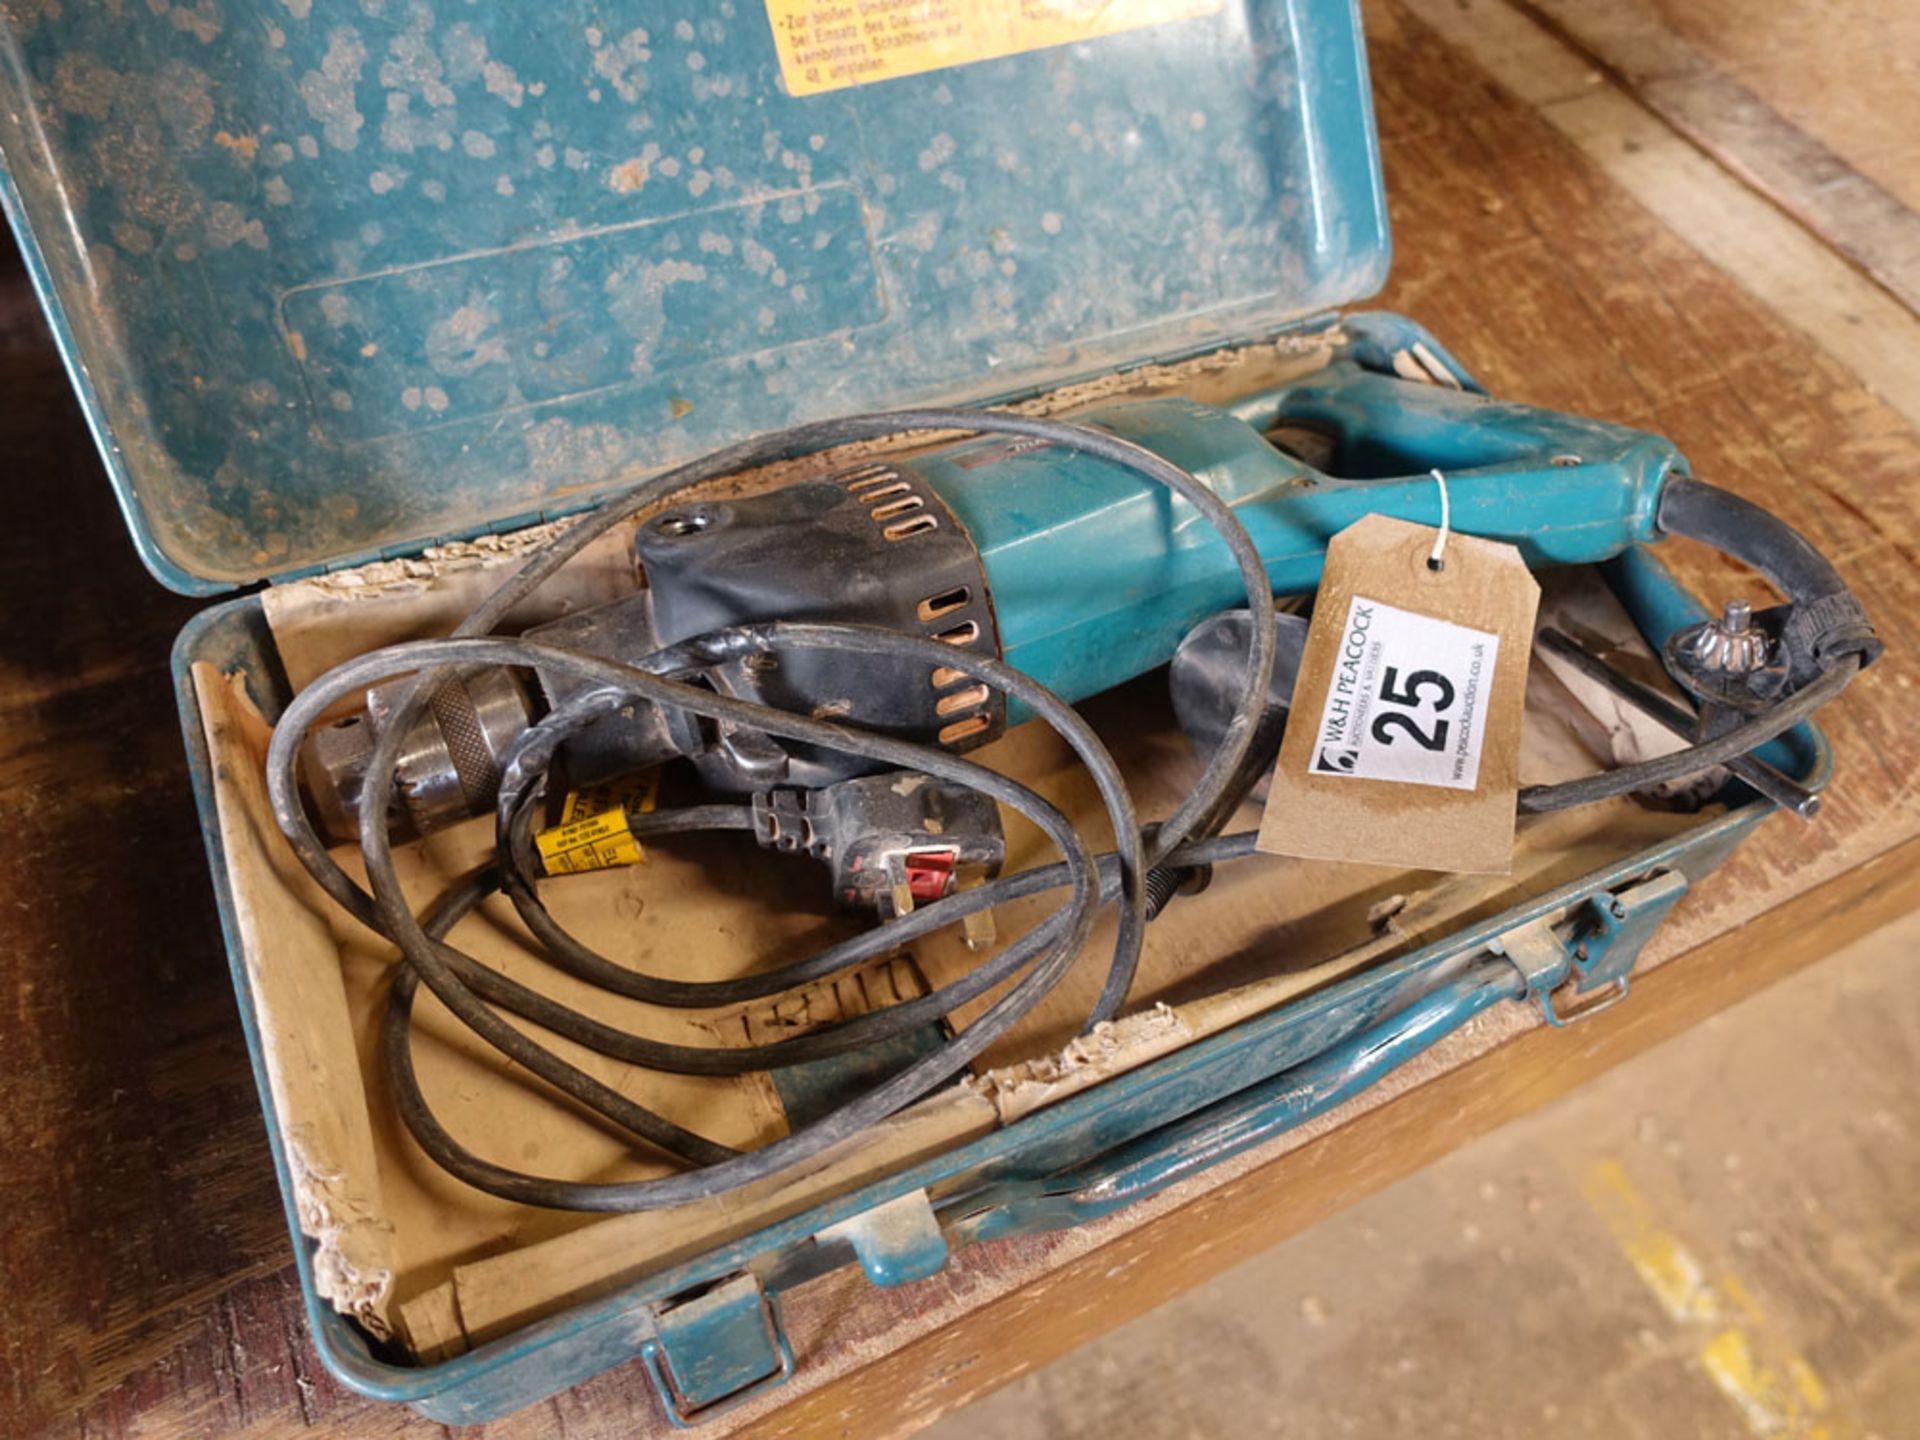 Makita heavy duty clutch drill, single phase electric and one other